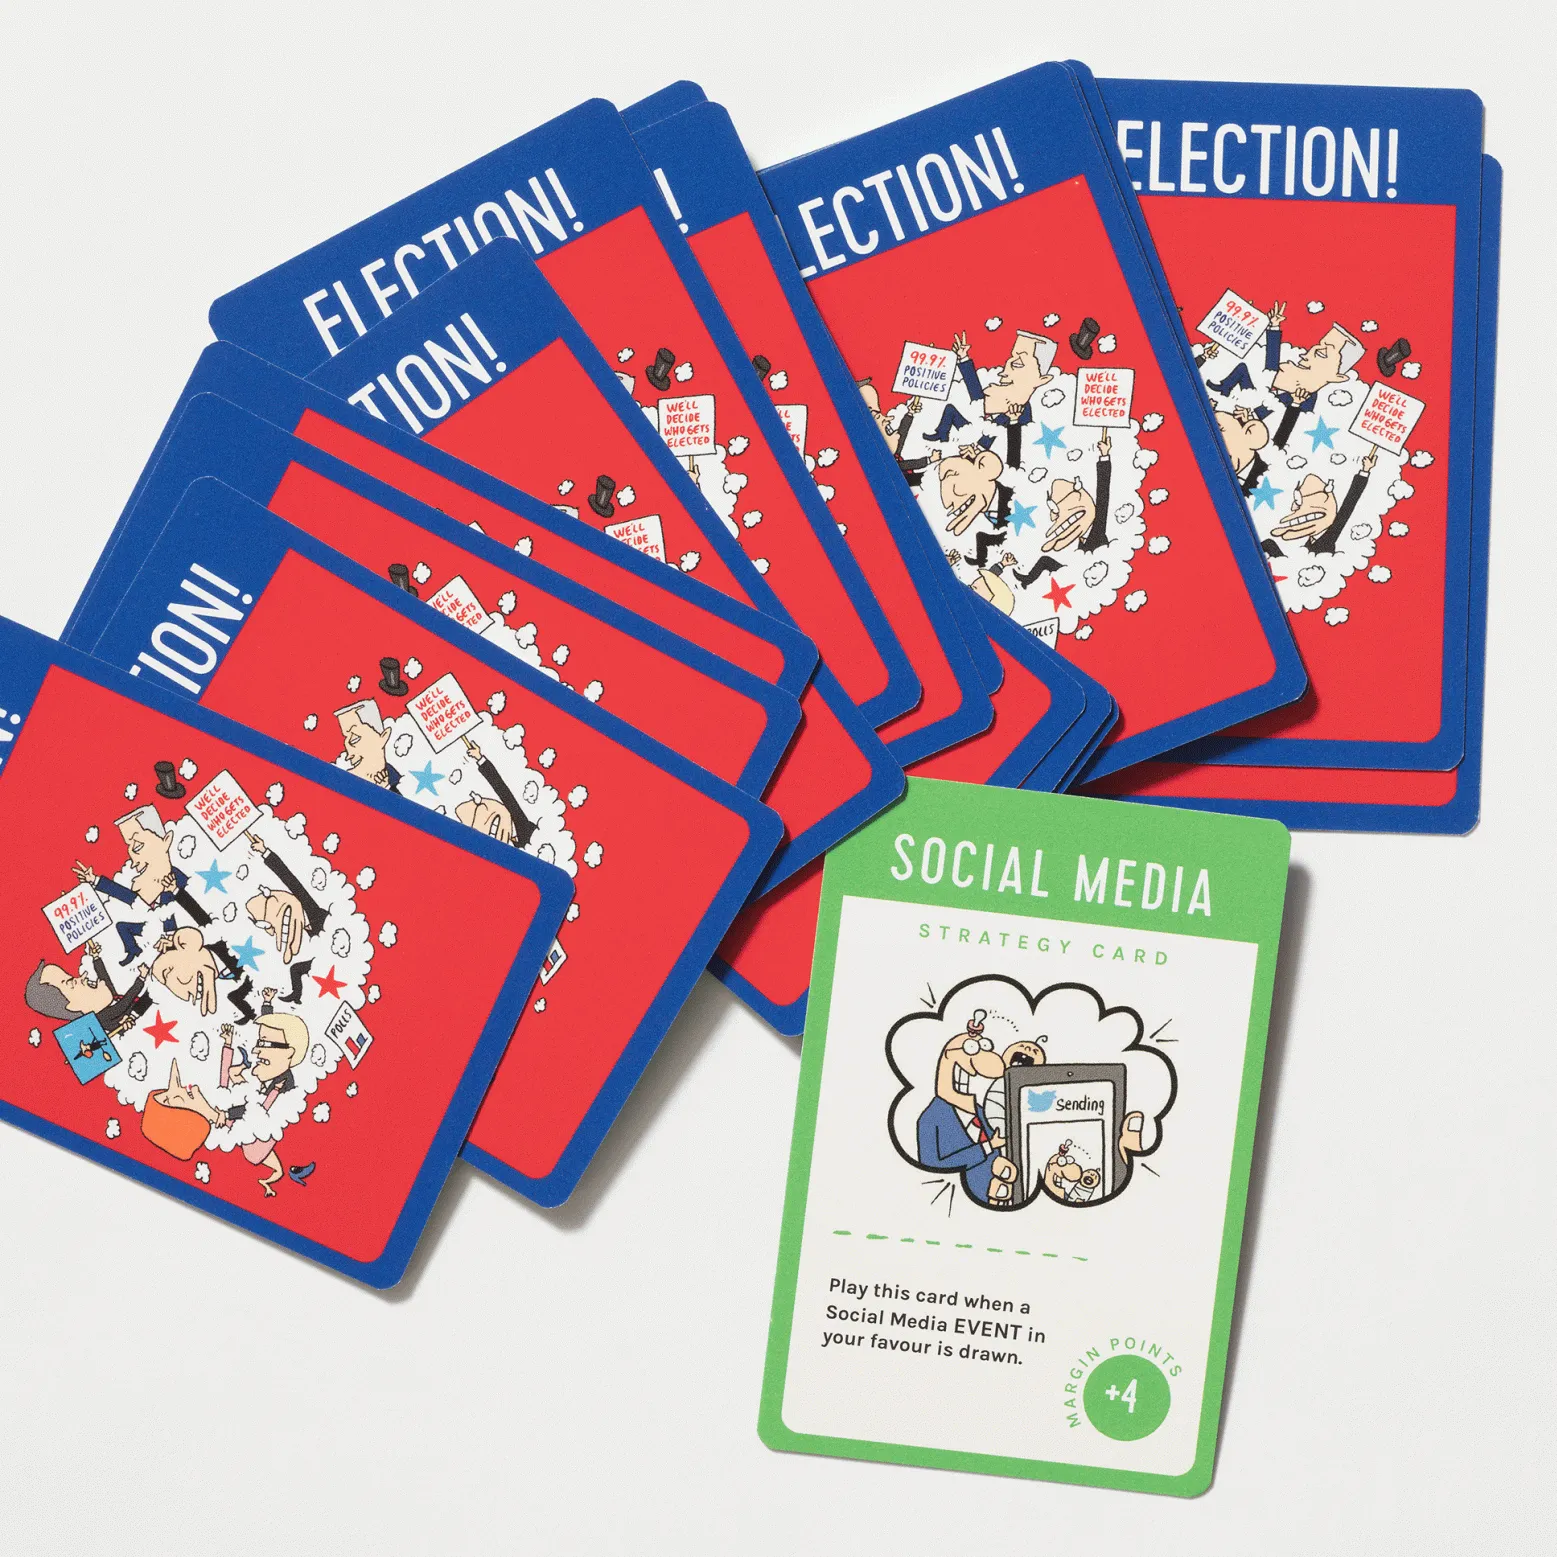 A deck of cards fanned out in a pile. Some cards are red with a blue border and the word Election! written at the top.  There is a cartoon caricature of politicians in the centre of each cartoon. There is one card with a green border with the words 'Play this card when a social media event in your favour is drawn. Margin points plus 4'.